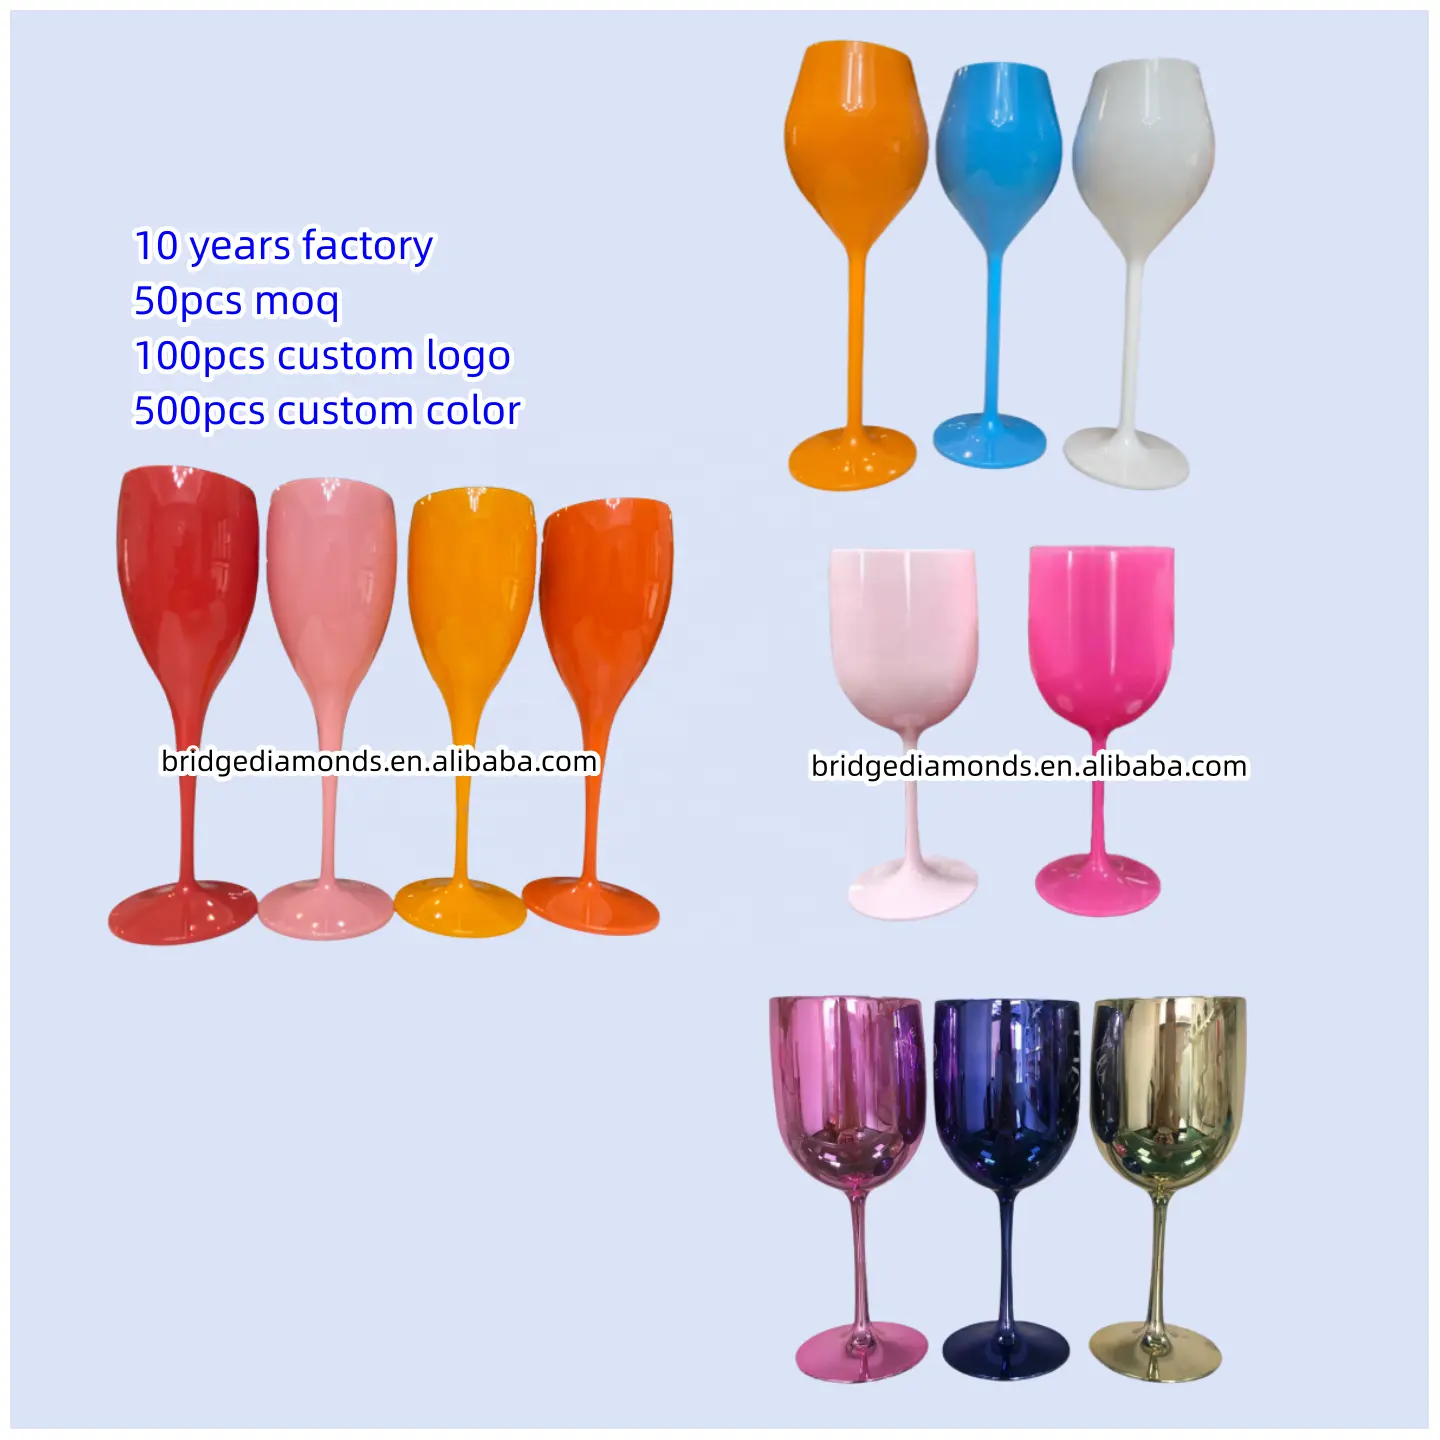 100pcs custom logo 500pcs custom color huge stocks party plastic Red wine Glass Colored wine glasses champagne flutes cup goblet